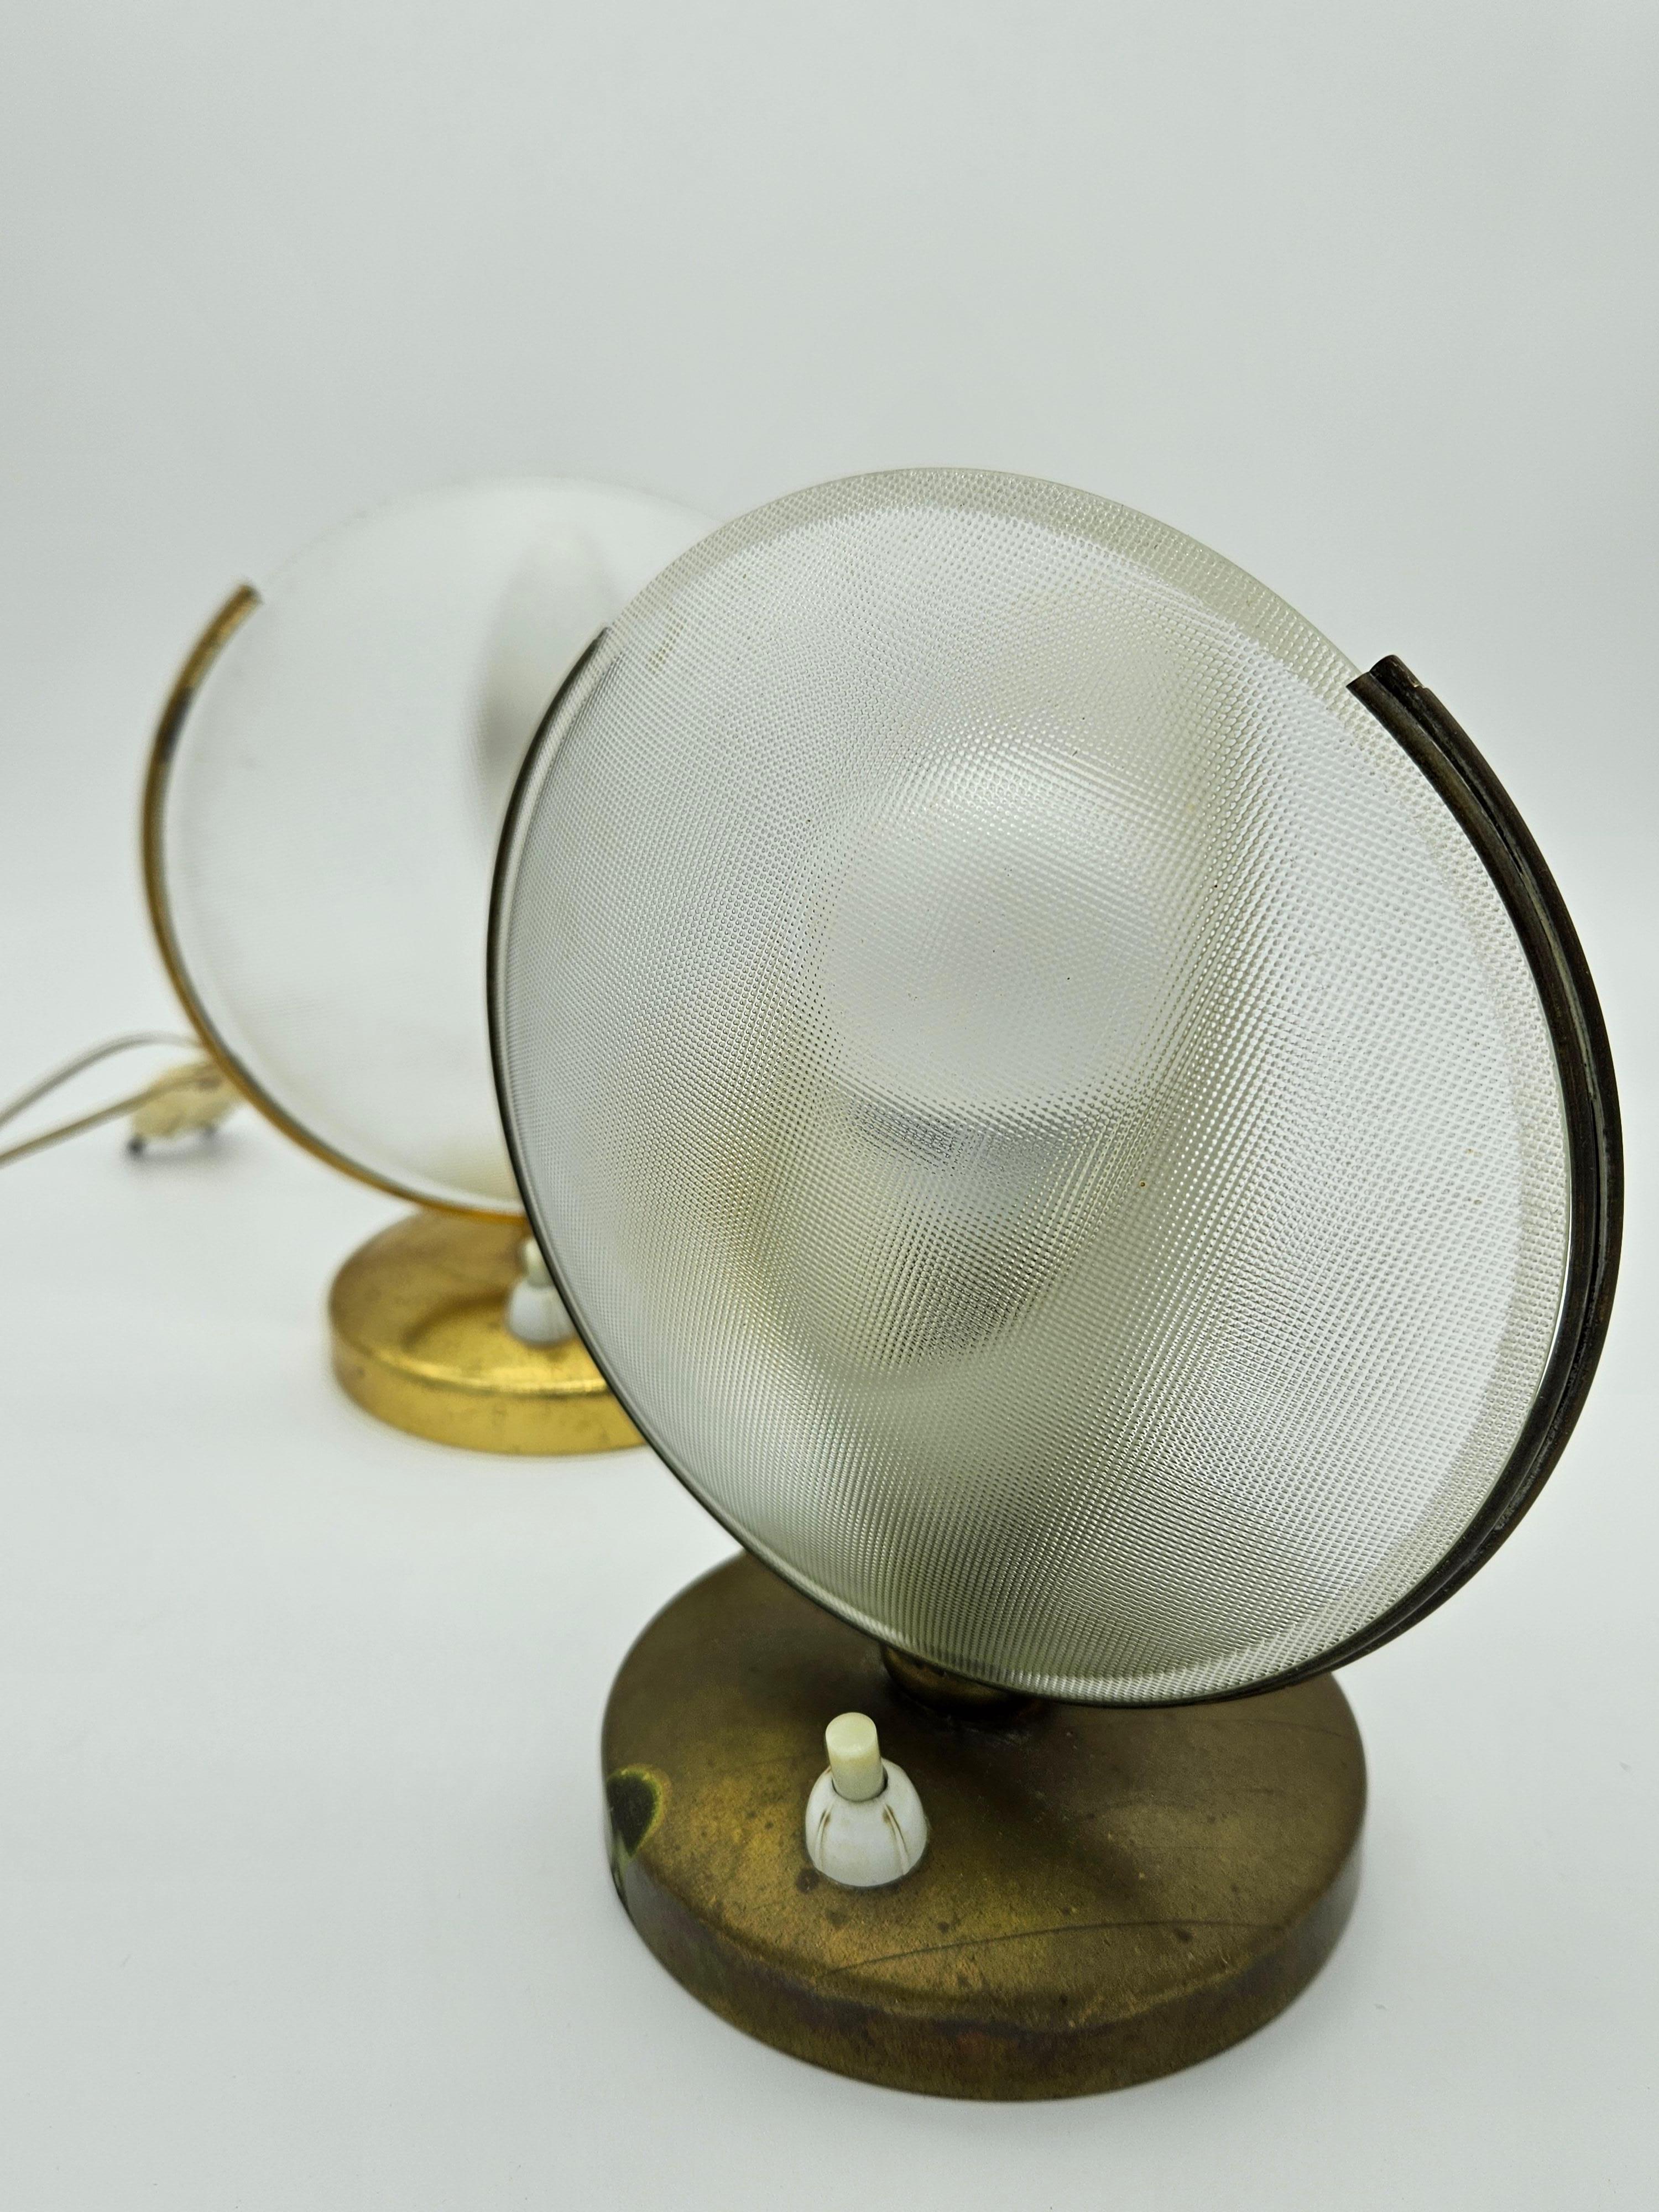 Pair of 1970s Italian abat jour with brass base and glass bowl with brass border.

One abat jour is missing the glass covering the bulb.

One of them has the original cable of the time, so it should be replaced as it is obsolete but still